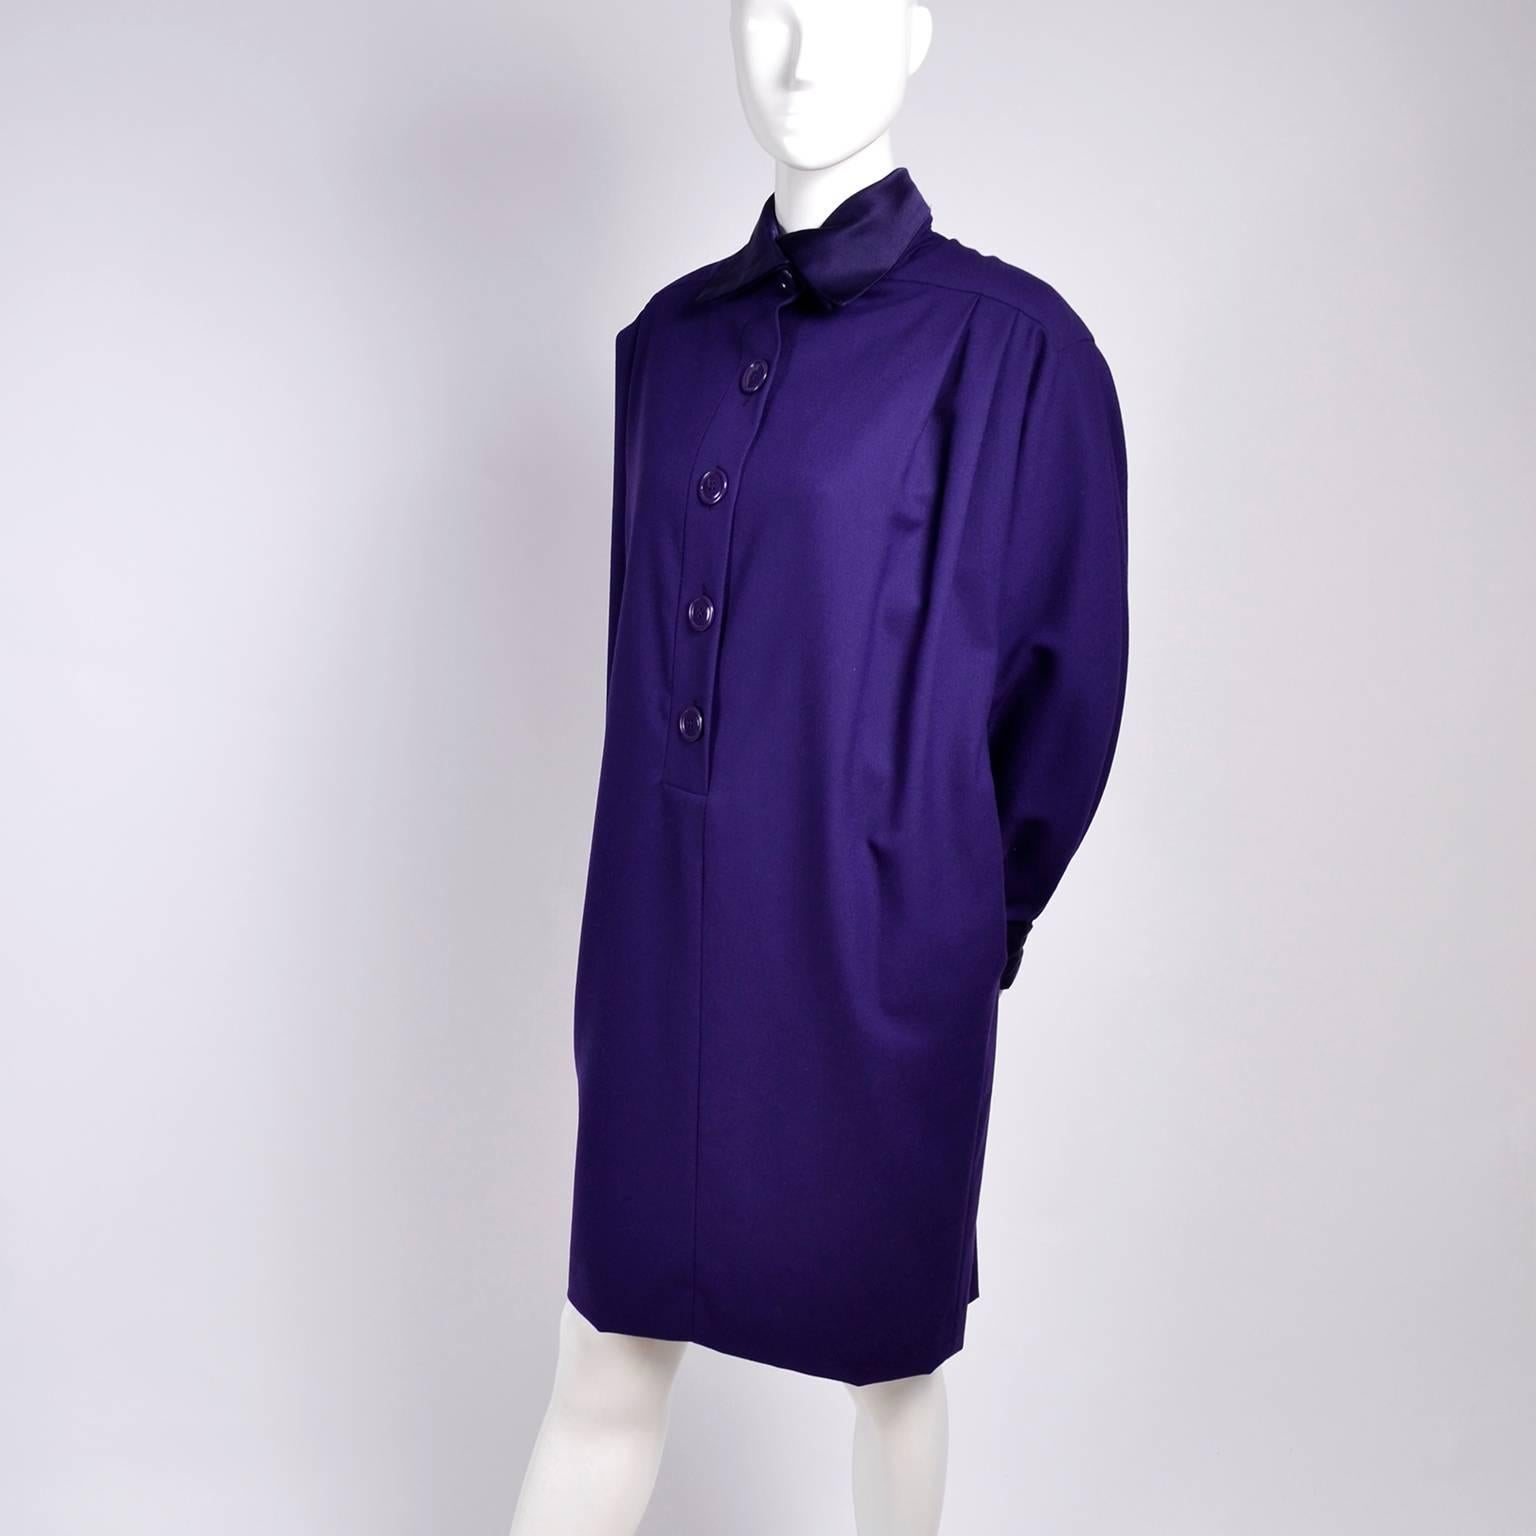 This is a classic shift dress with long sleeves from Gianfranco Ferre's Studio line. The dress is from an estate of beautiful clothing we acquired recently. The woman who owned it had impeccable taste and wore only the best designer clothing.  The